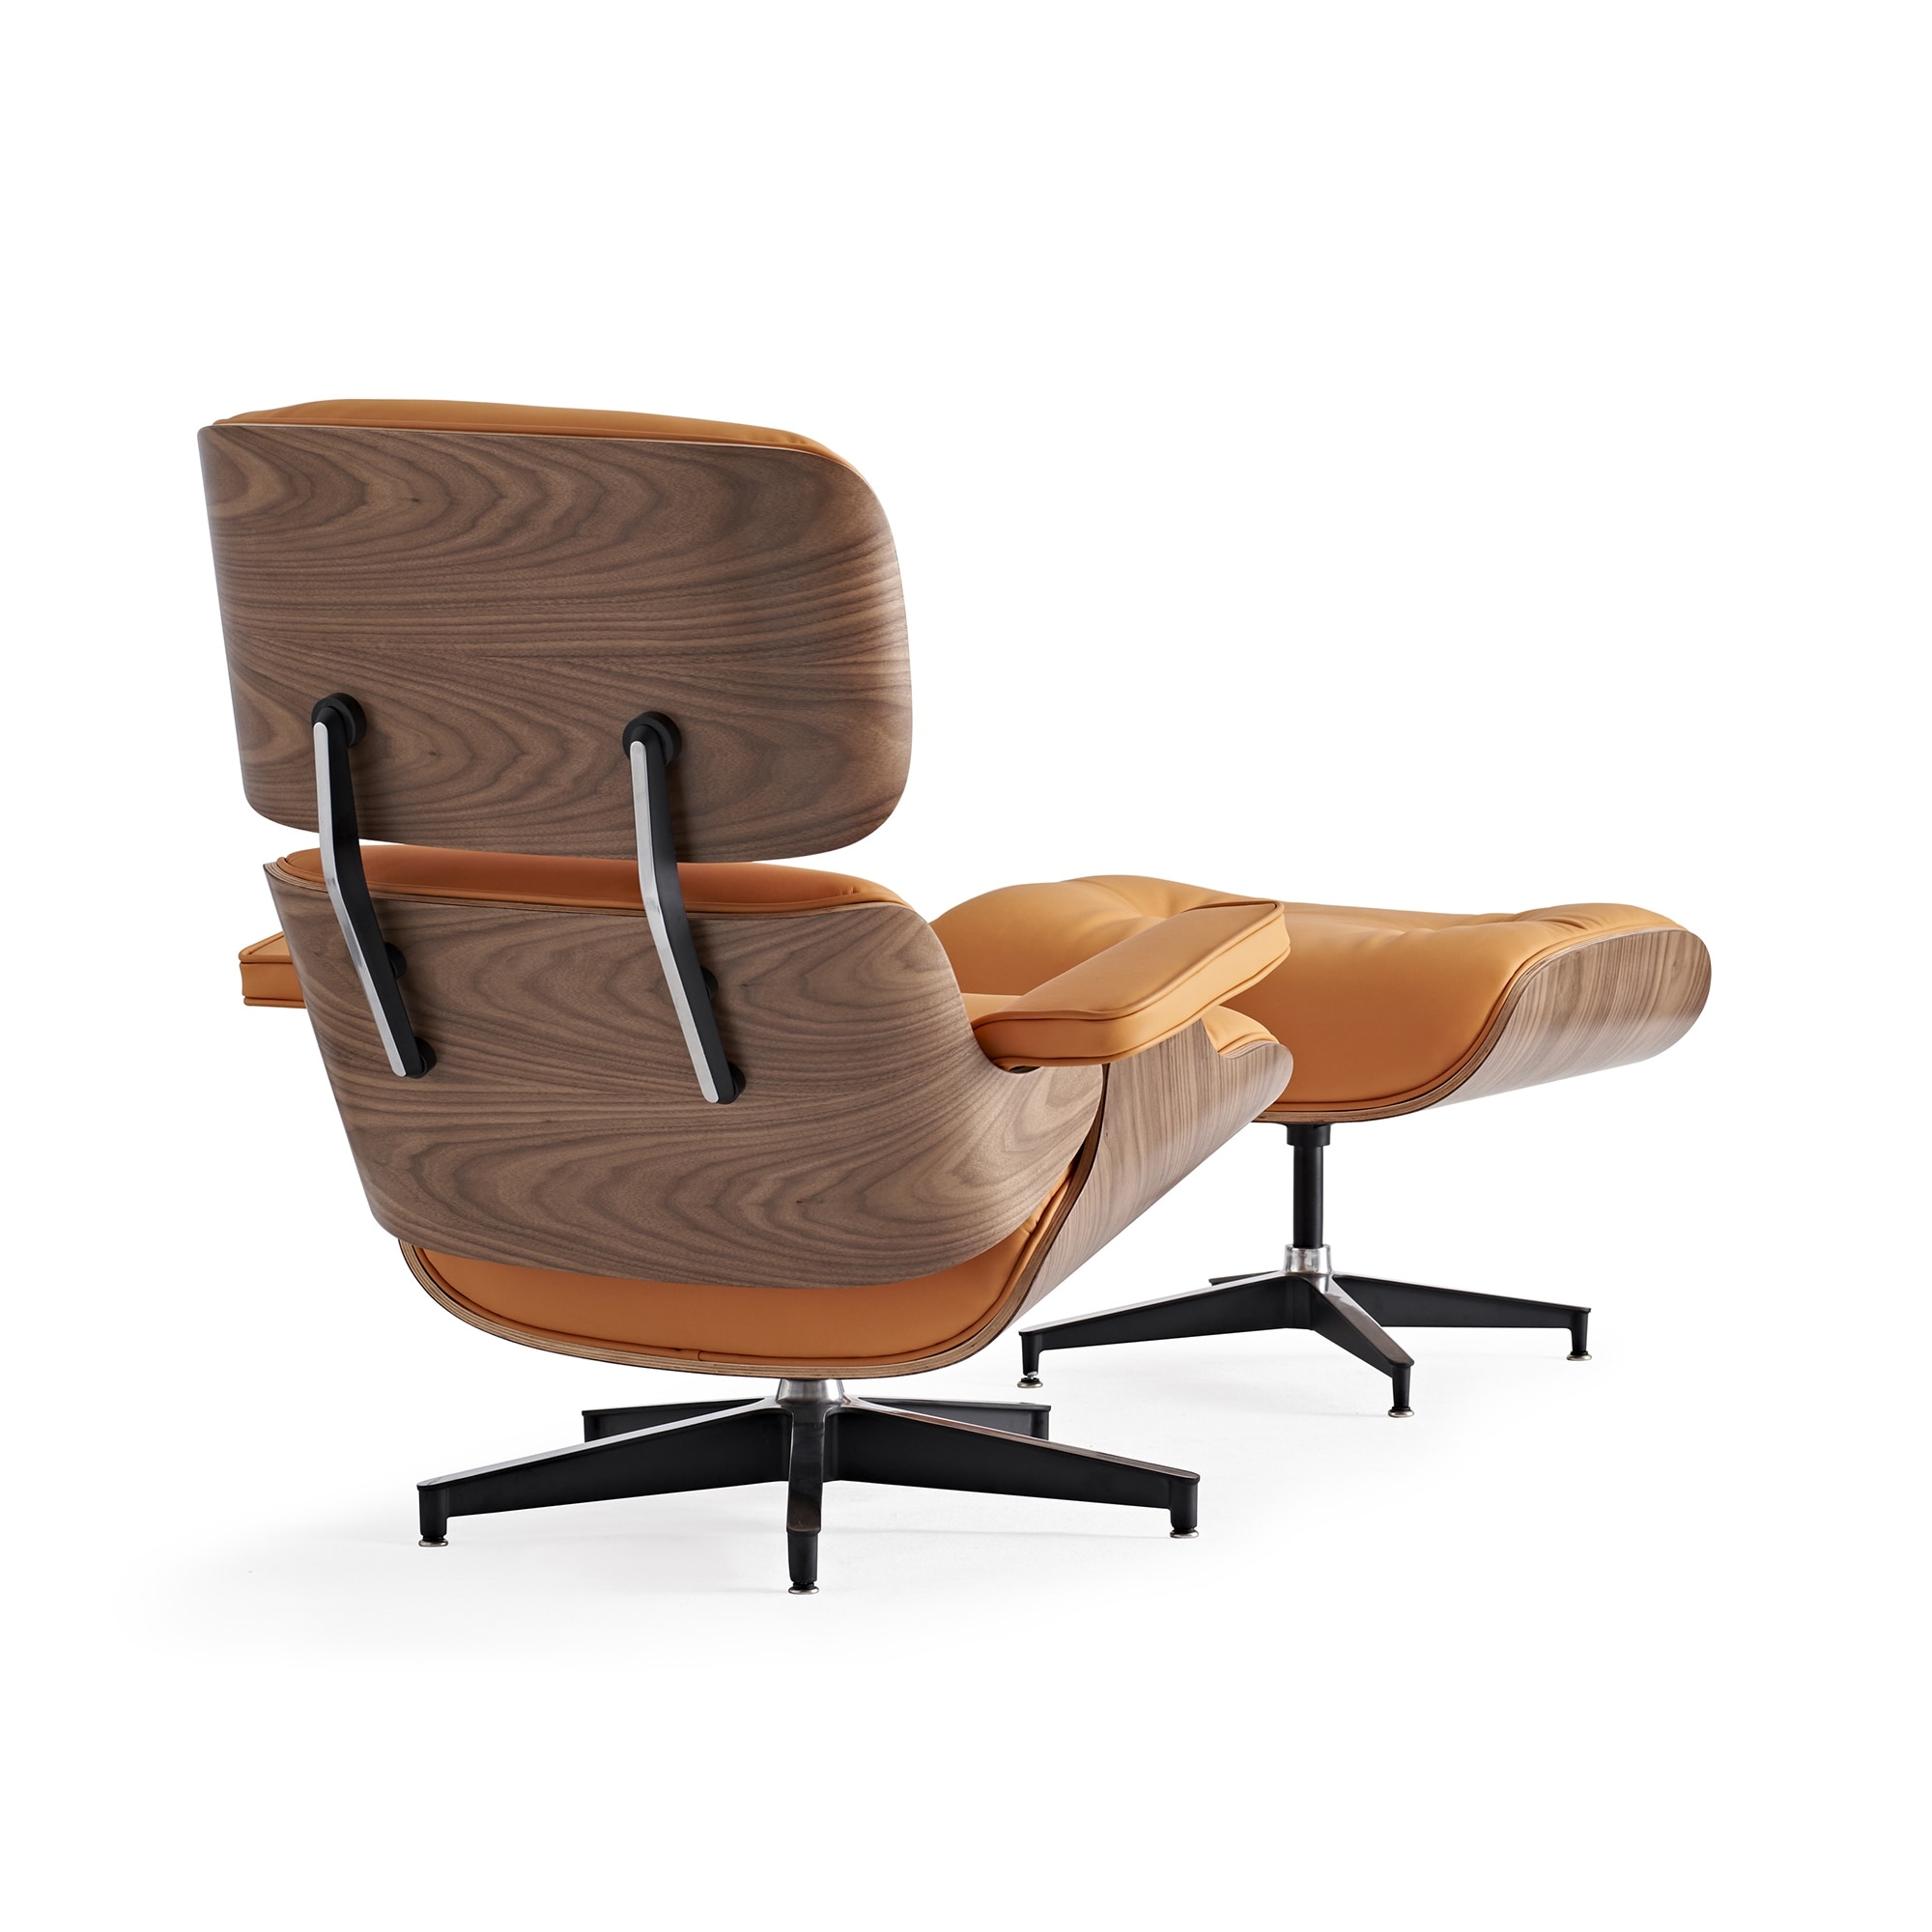 Clyde's Leather Recoloring Balm  Eames lounge chair, Leather, The balm